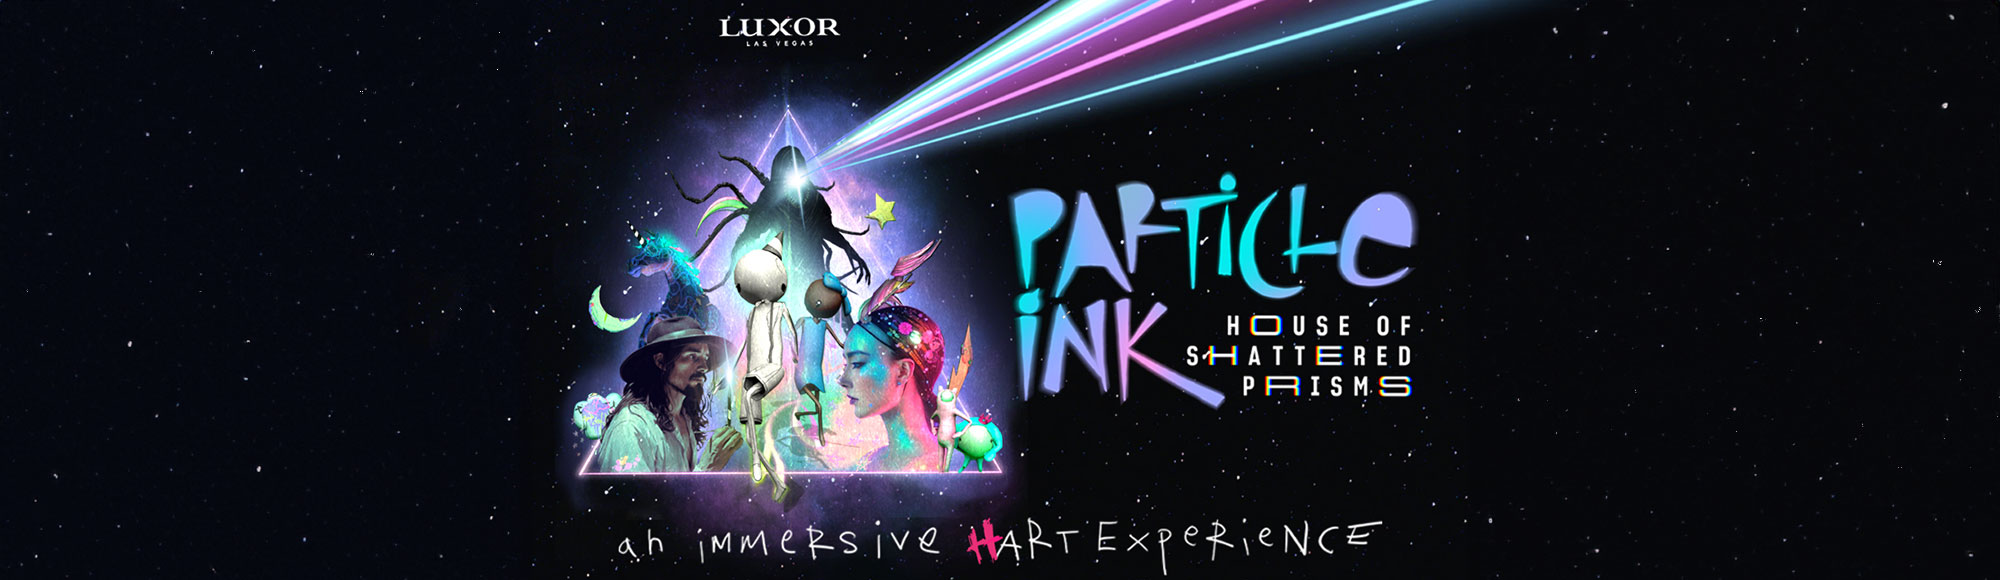 Particle Ink - The Wanderlust Experience show